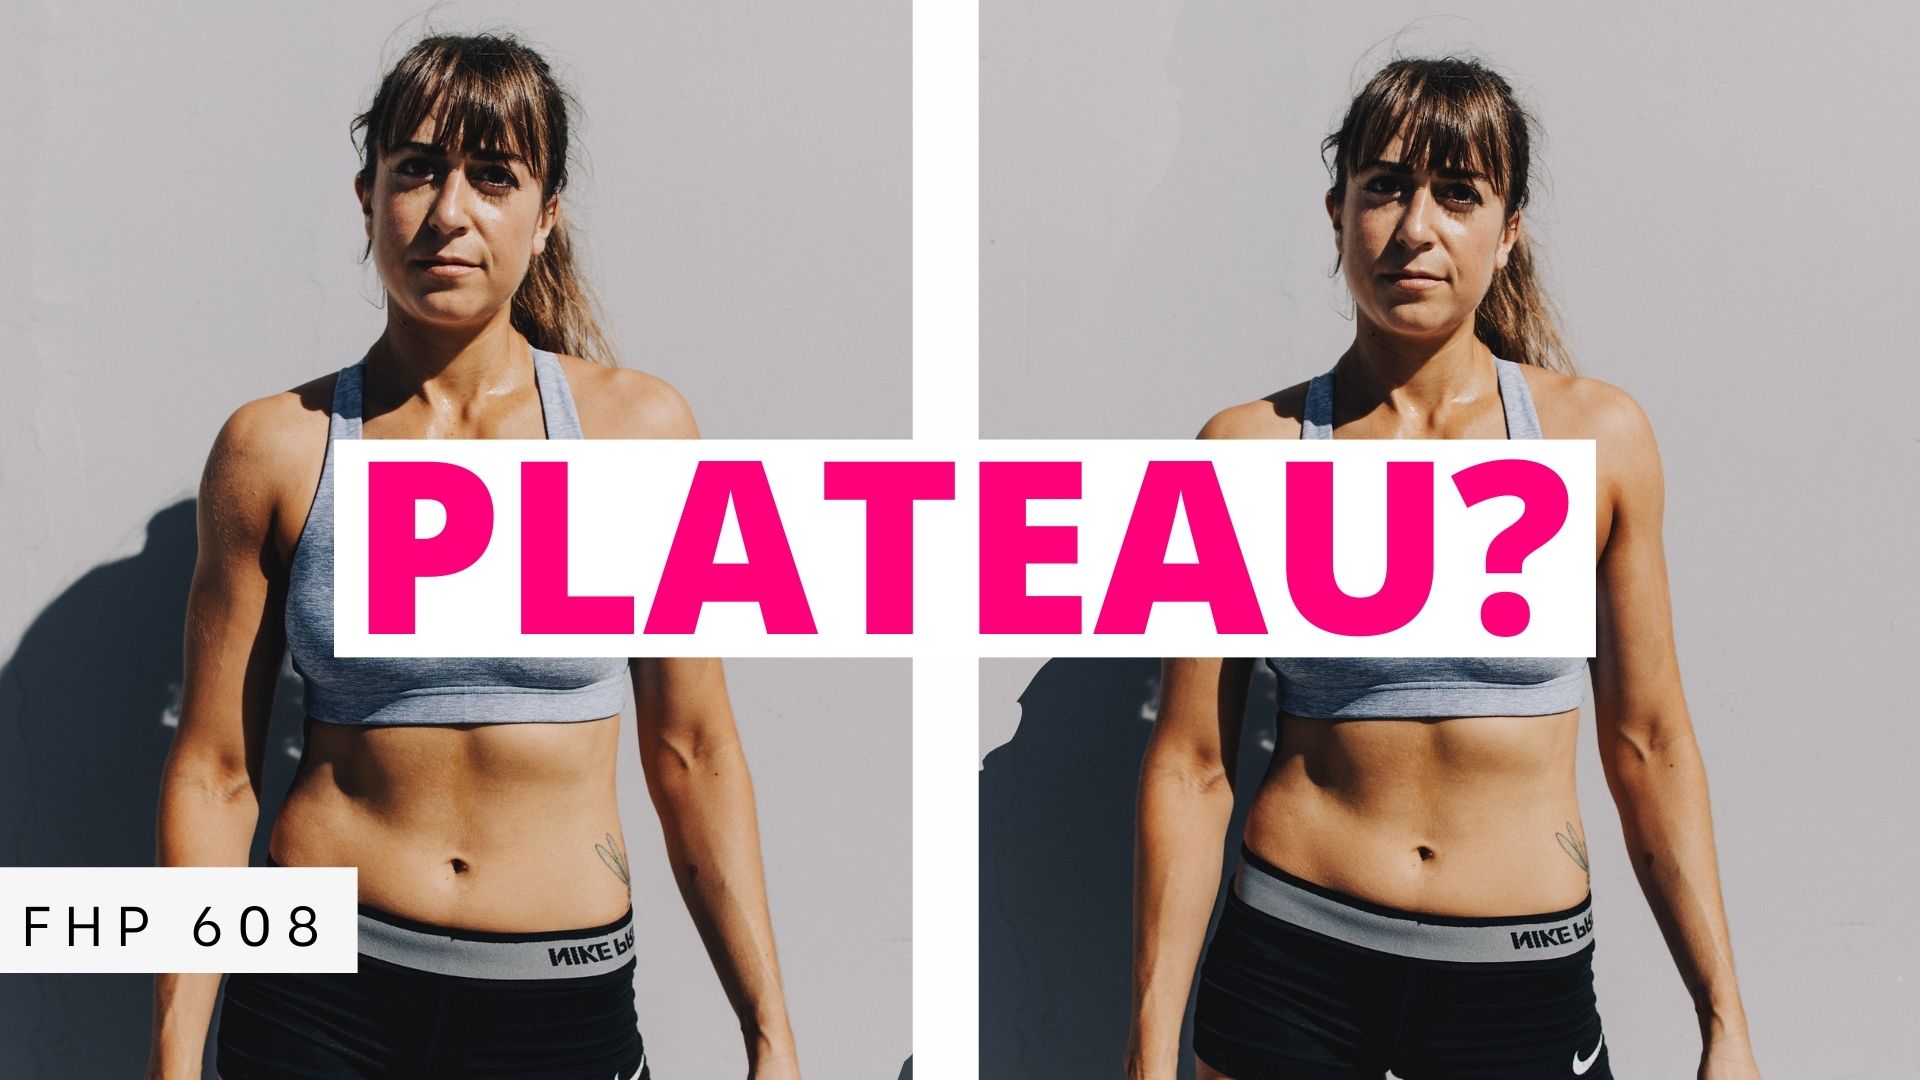 Is it really a plateau?